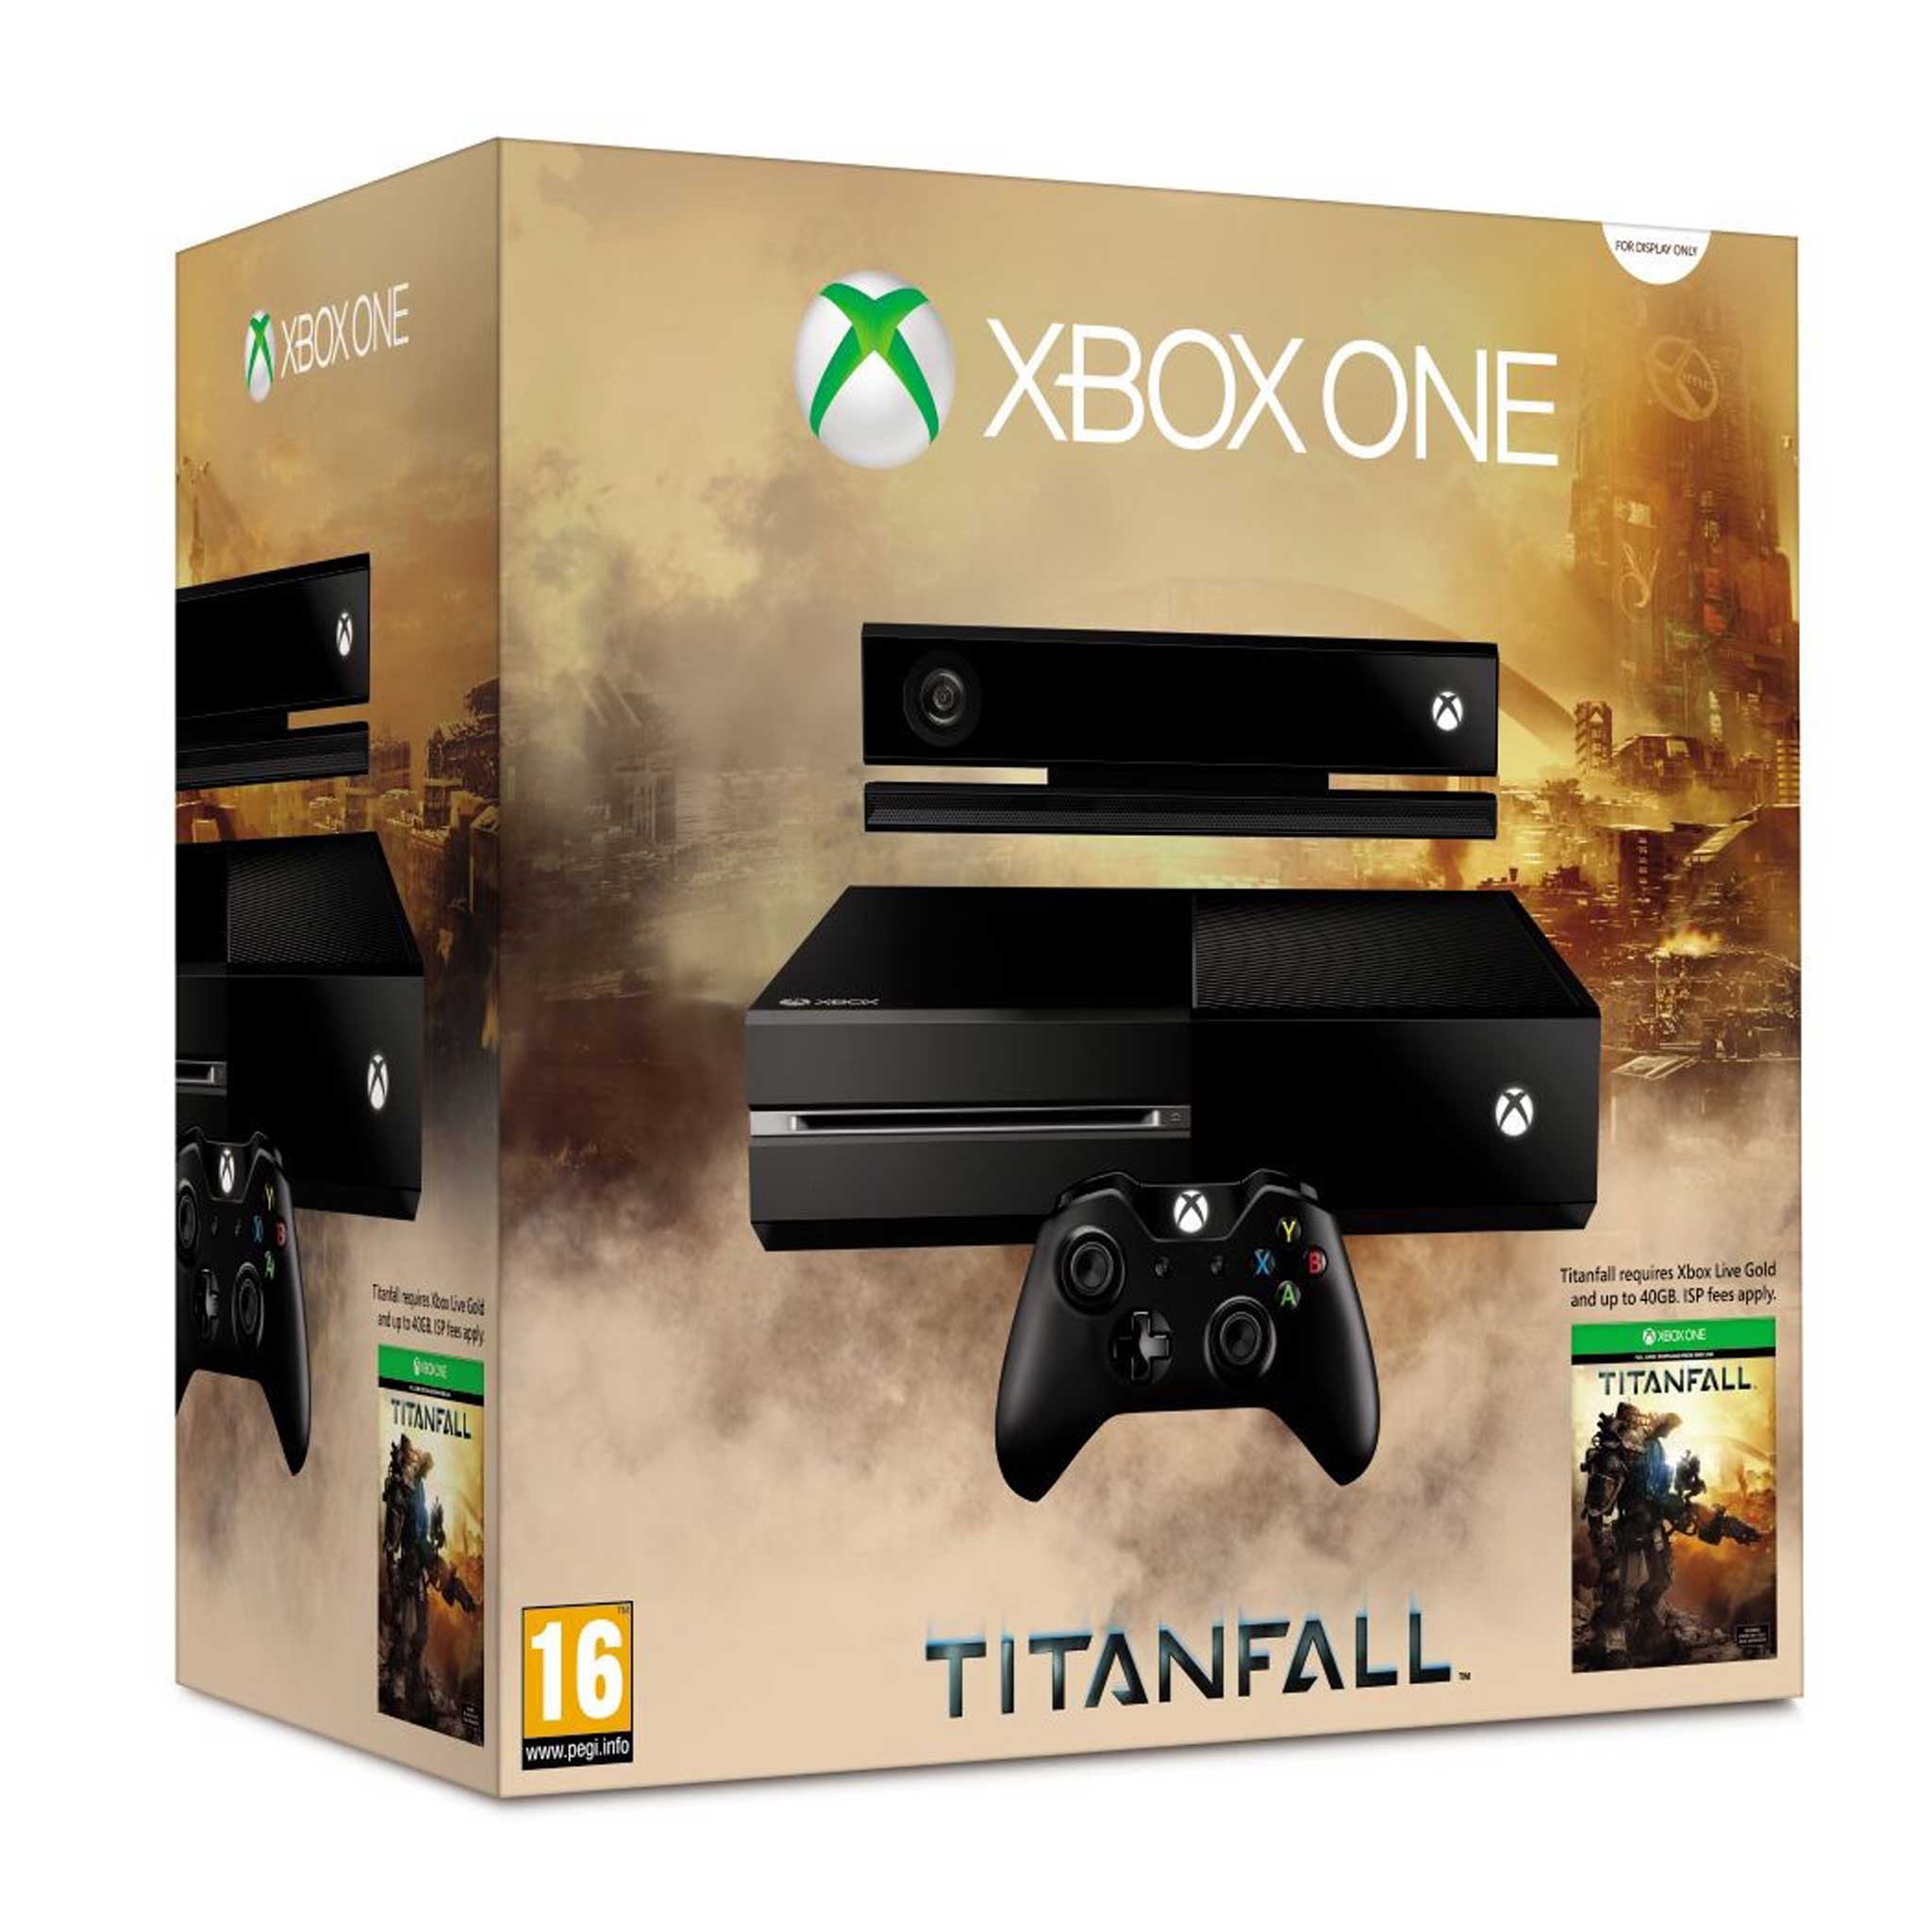 Robot reboot: the Titanfall Bundle is on sale at Asda for £349